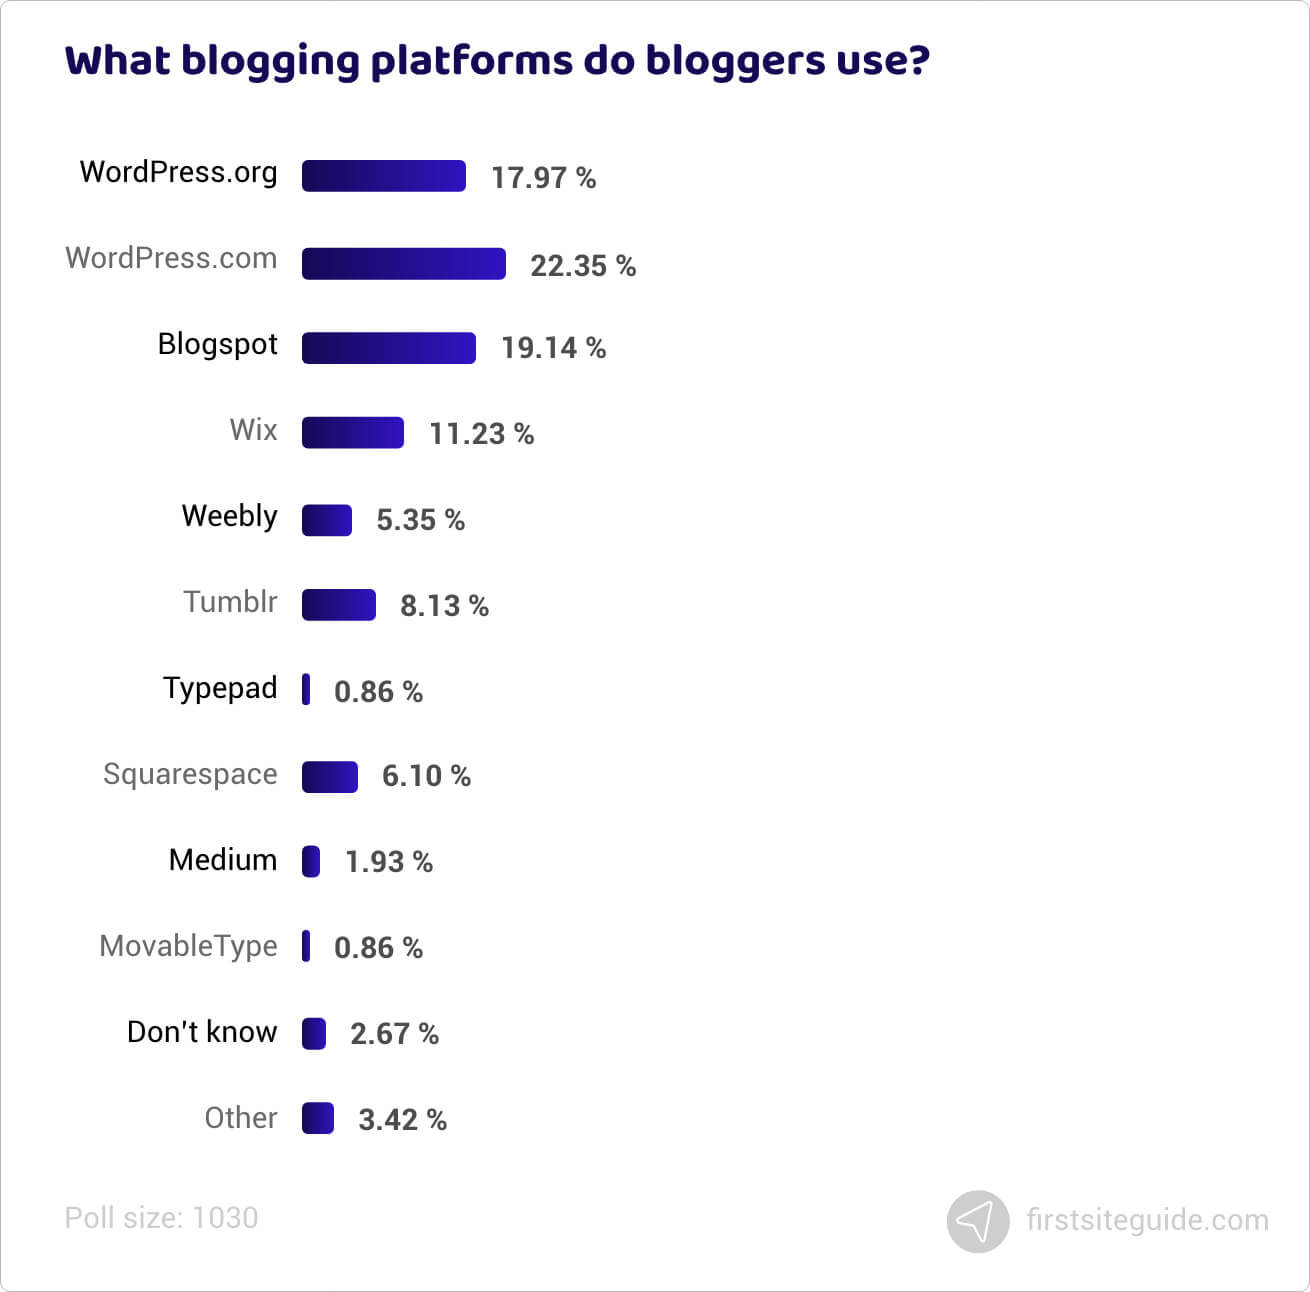 What blogging platforms do bloggers use